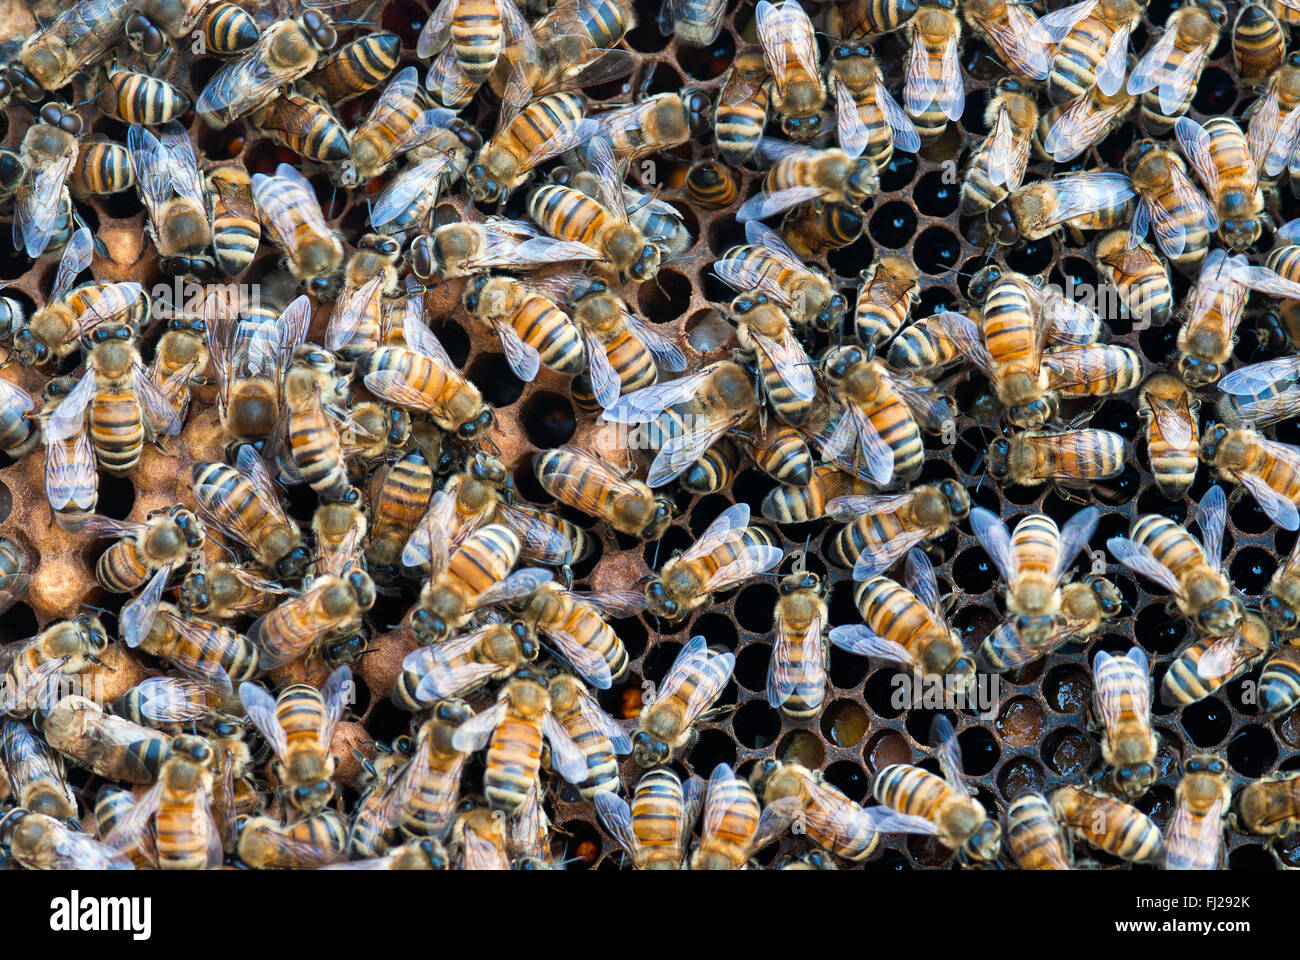 Bees inside a beehive. Stock Photo